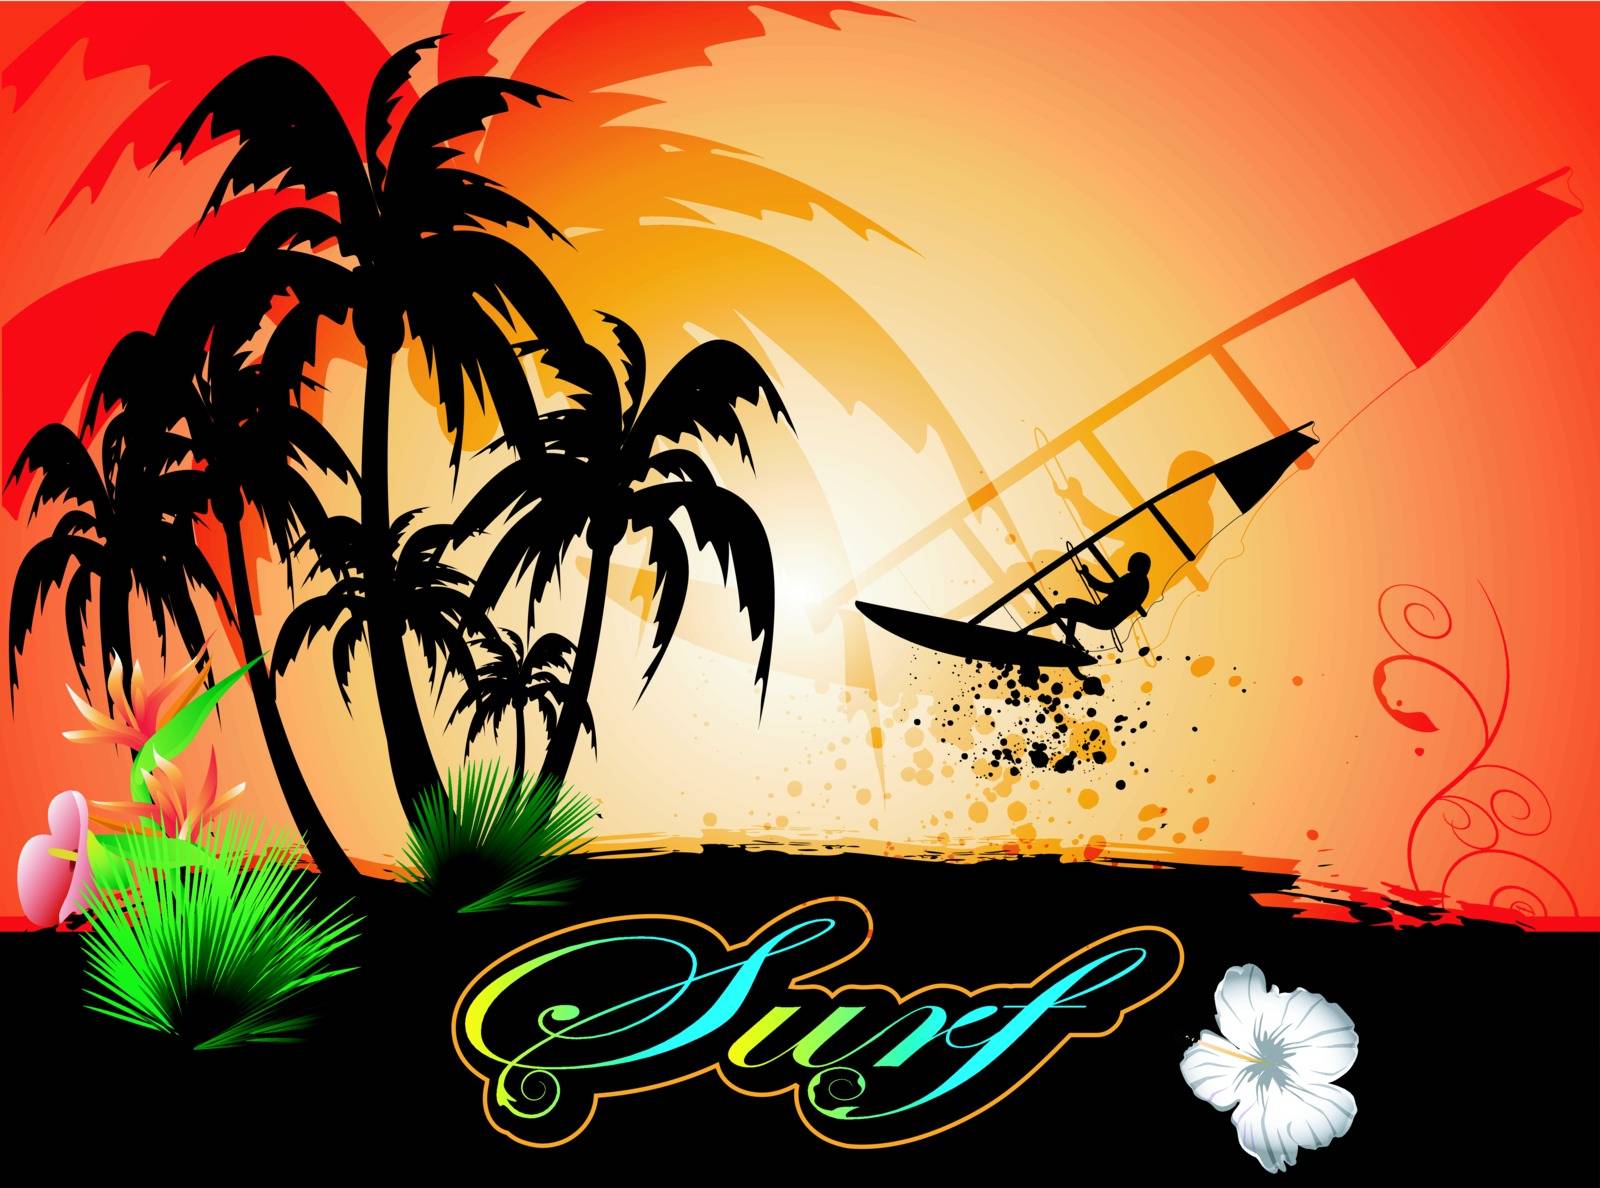 surf background with surfers and palm trees